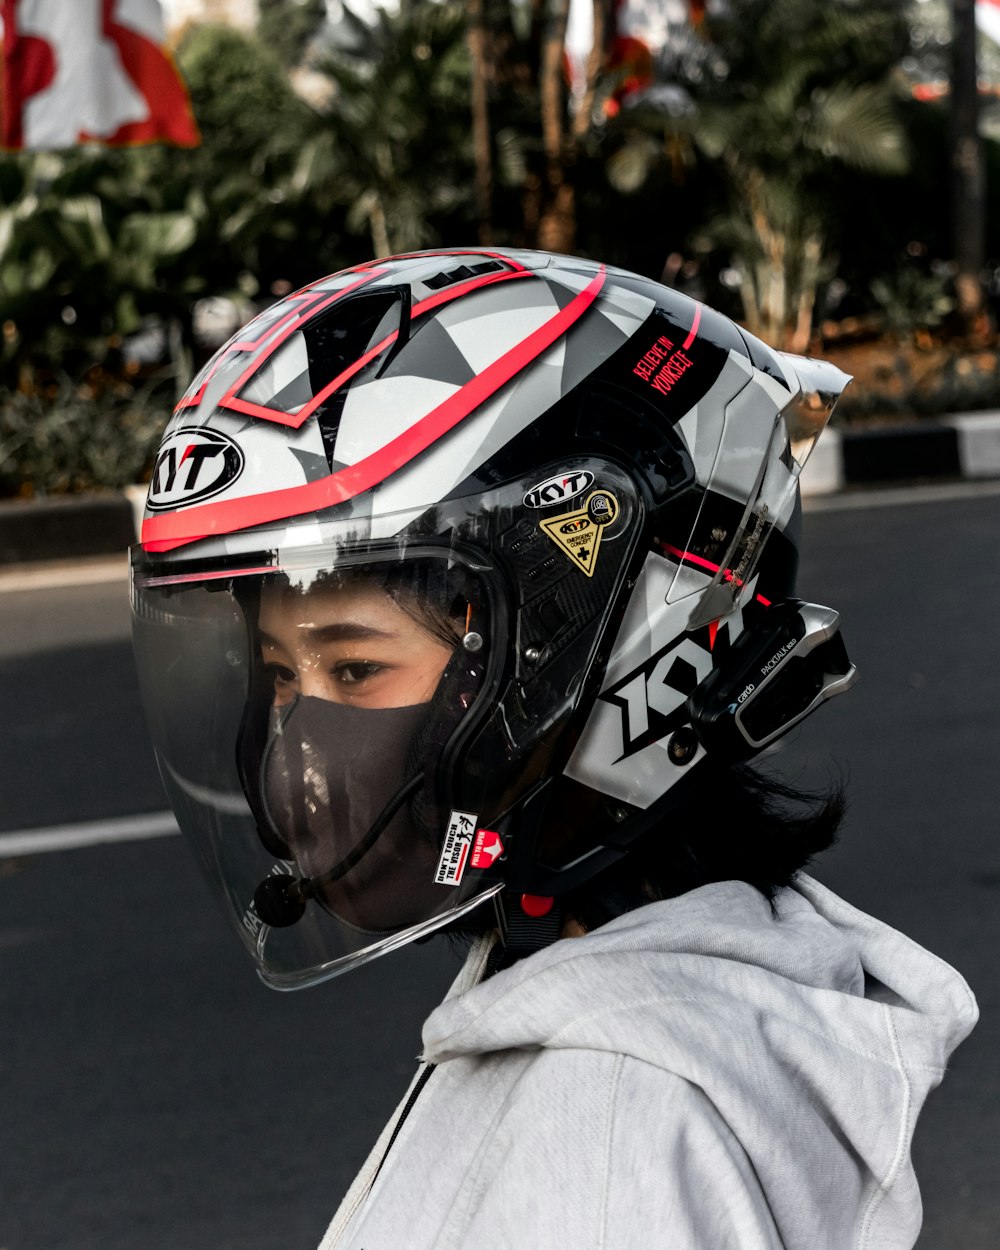 a person wearing a helmet on a city street